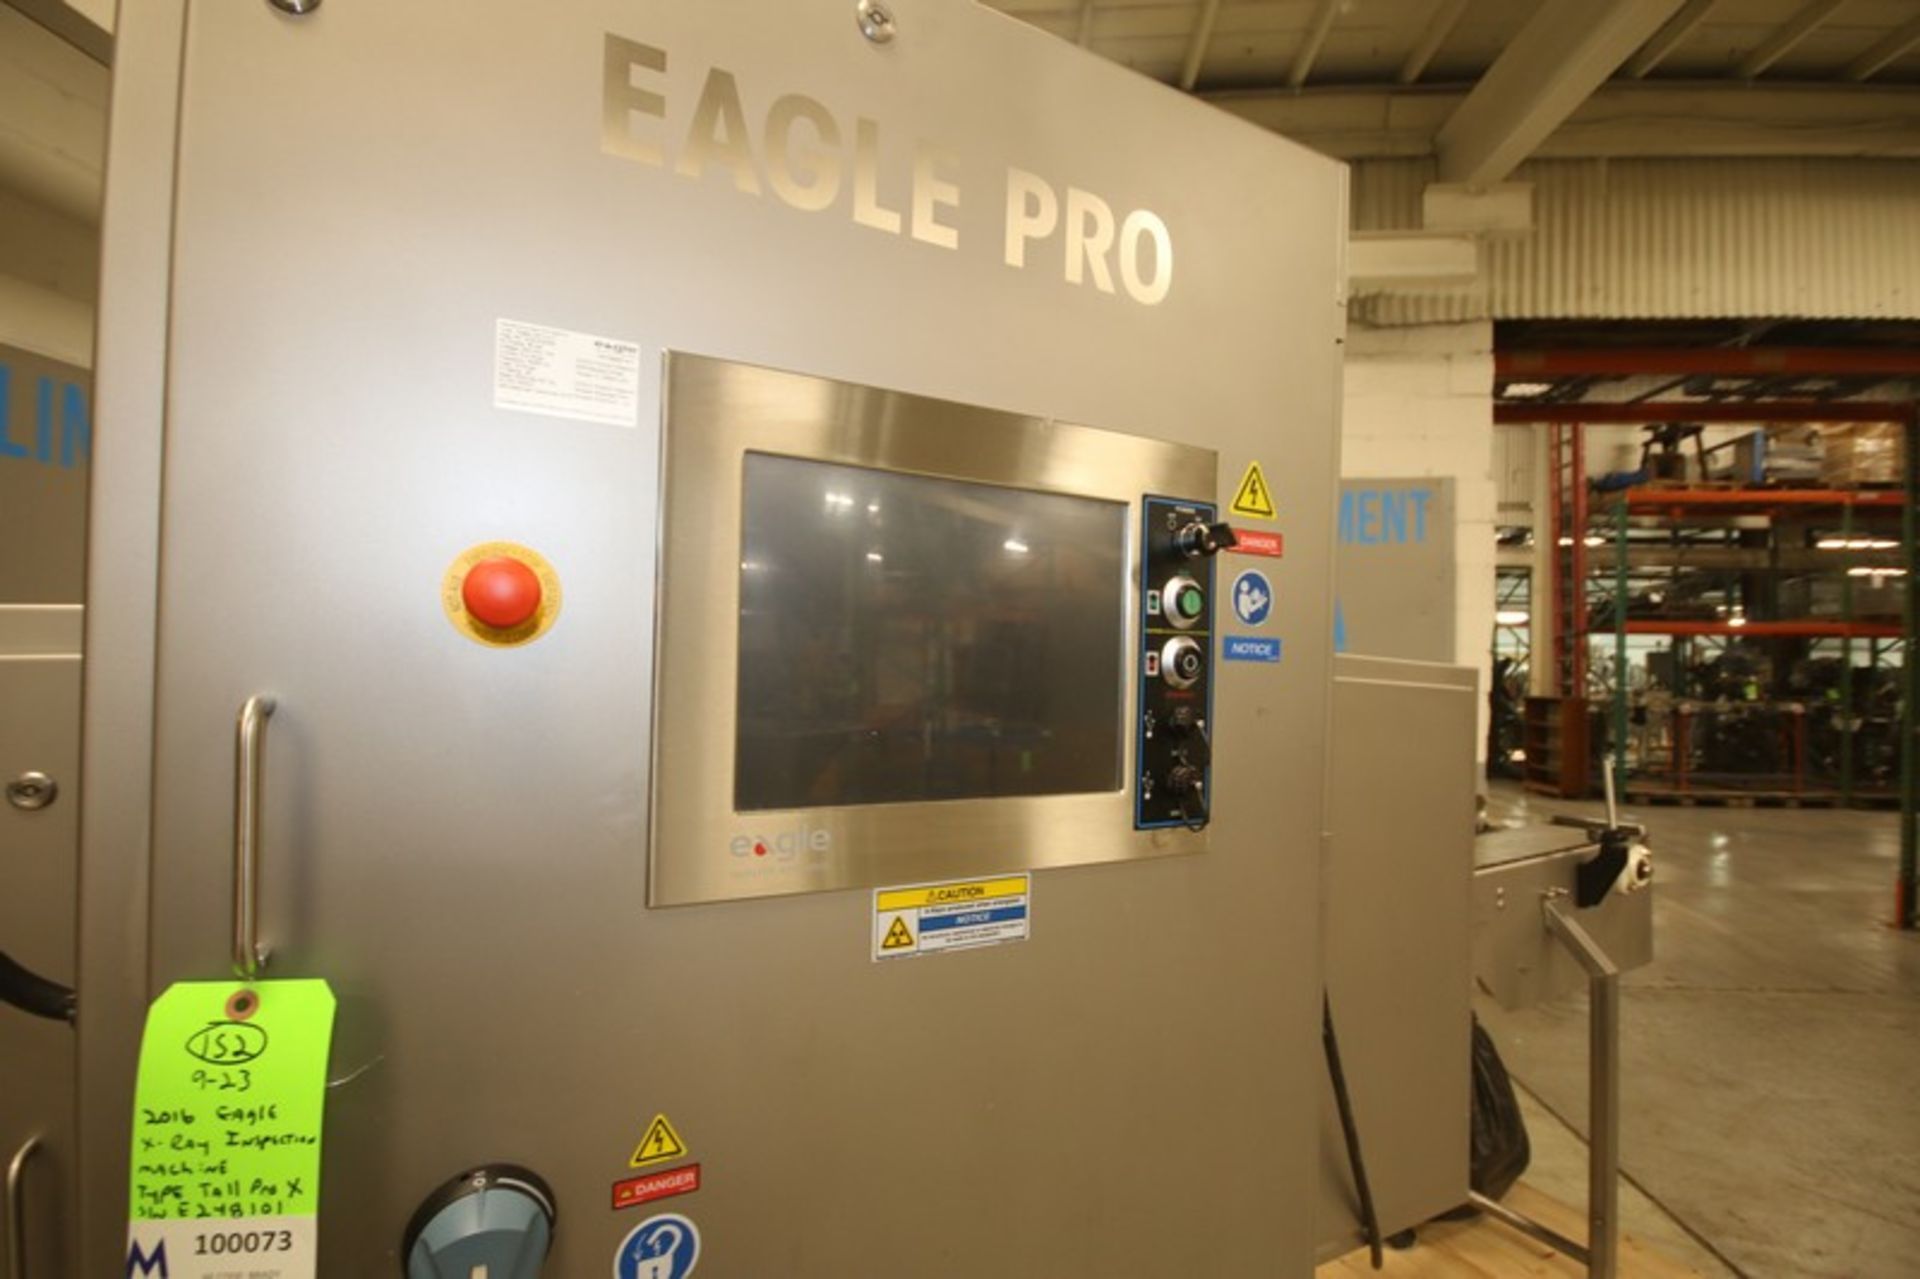 2016 Eagle Pro X-ray Machine, Type Eagle Pro X, SN E248101, Aprox. 9" Product Height, with In Feed & - Image 10 of 12